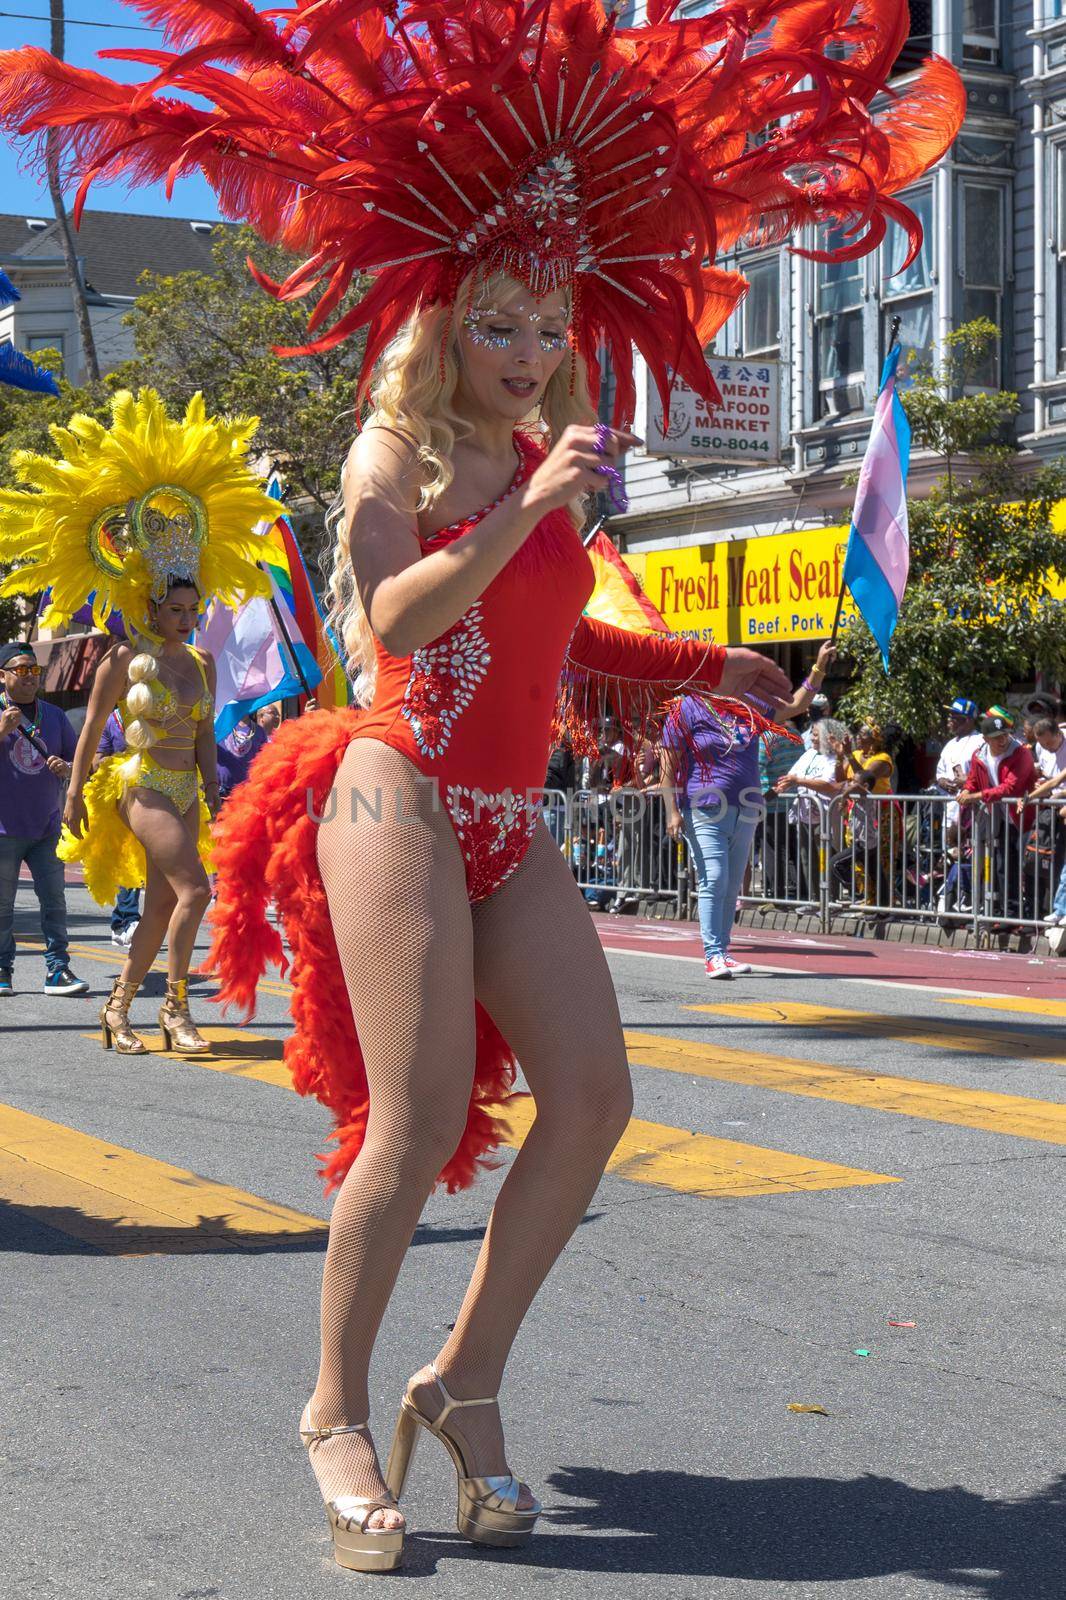 Performers dancing during the 44th Annual Carnaval parade in San Francisco, CA. by timo043850